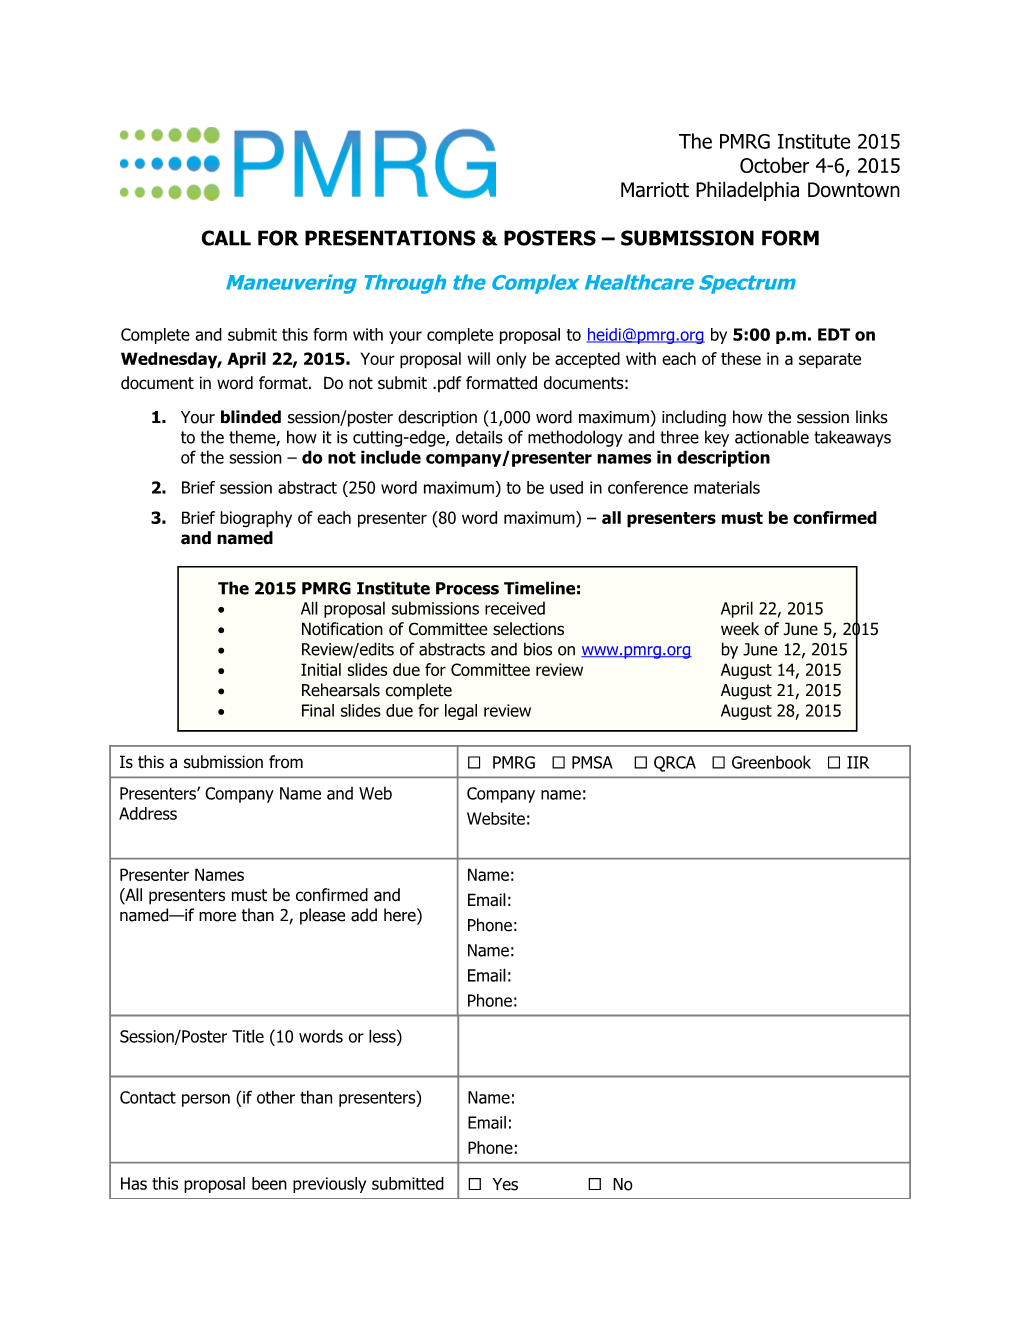 Call for Papers Submission for the Pmrg Institute